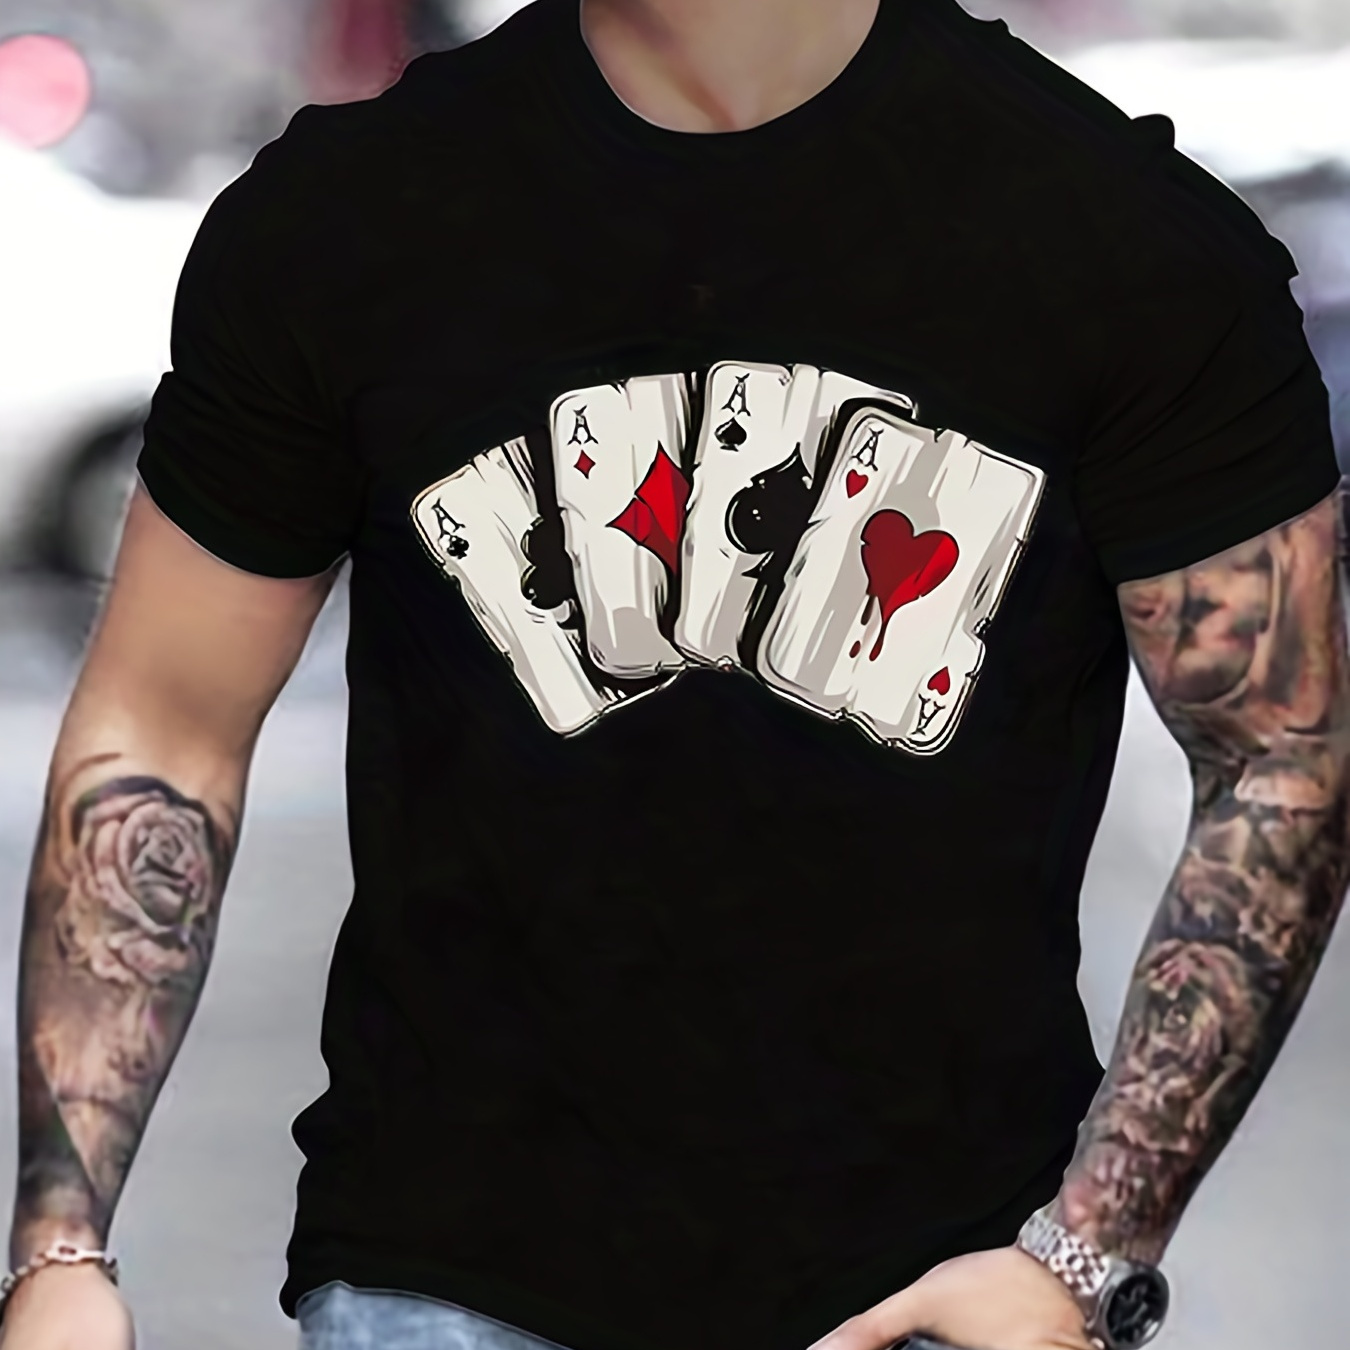 Poker Pattern, Men's Graphic T-shirt, Casual Comfy Tees For Summer